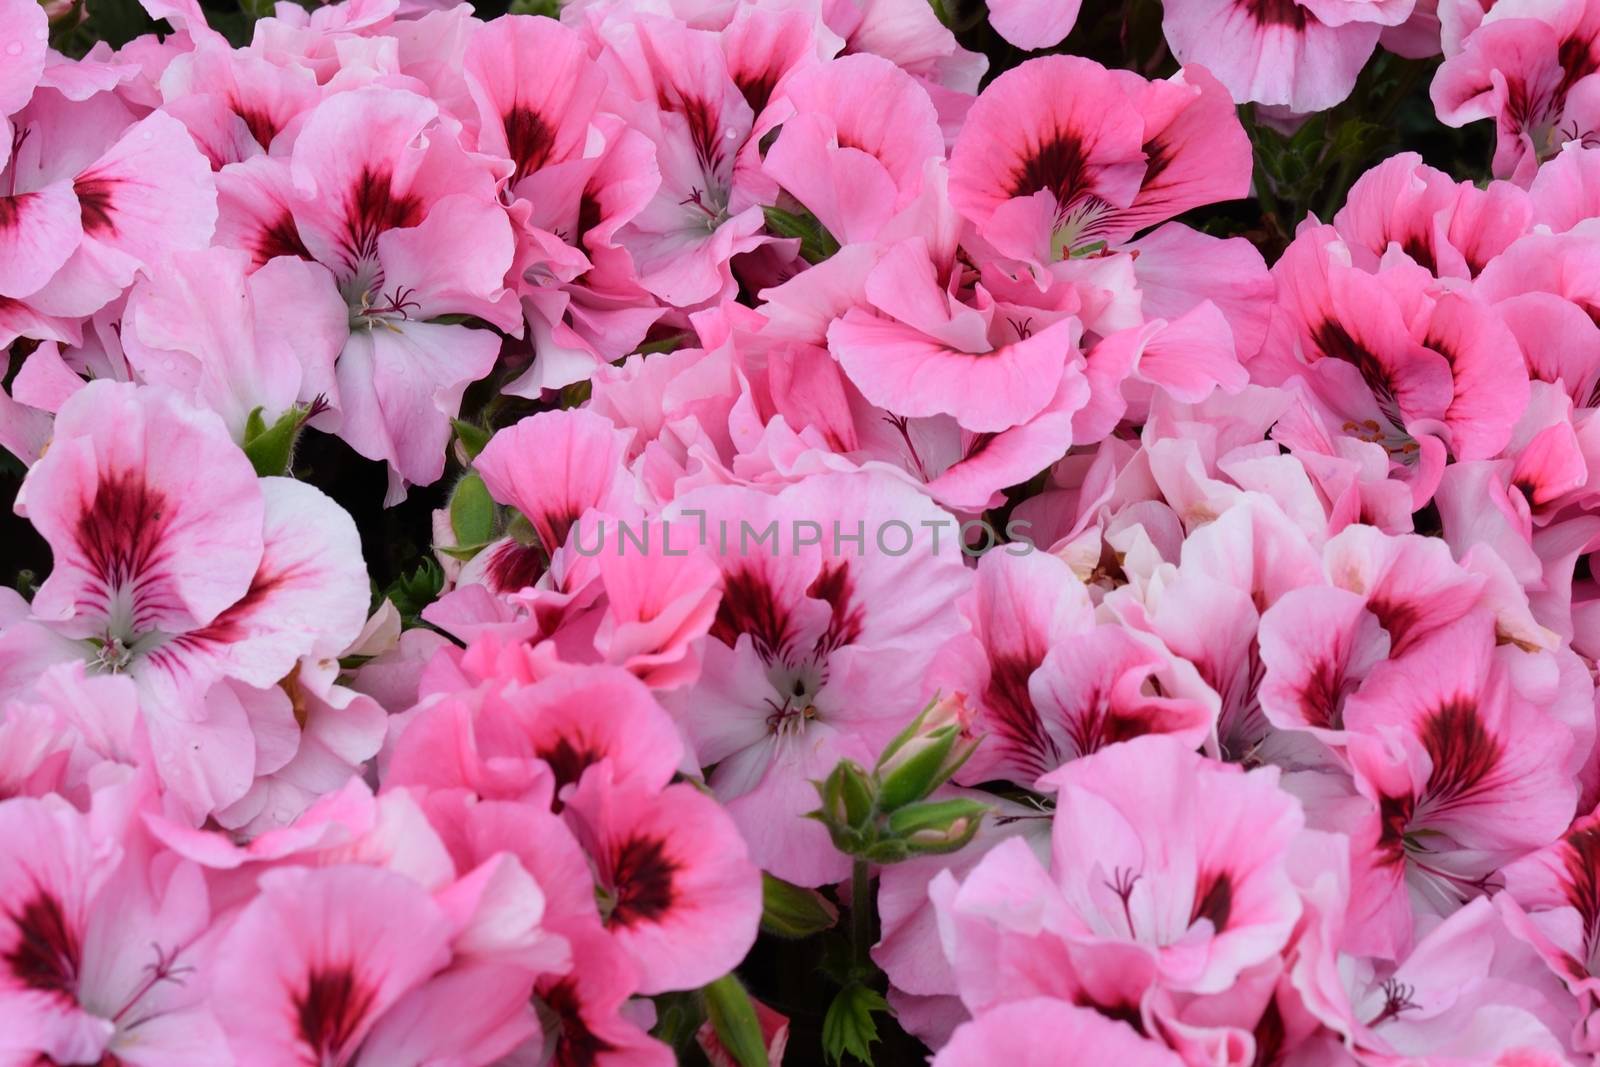 Large group of Pink Flowers by pauws99